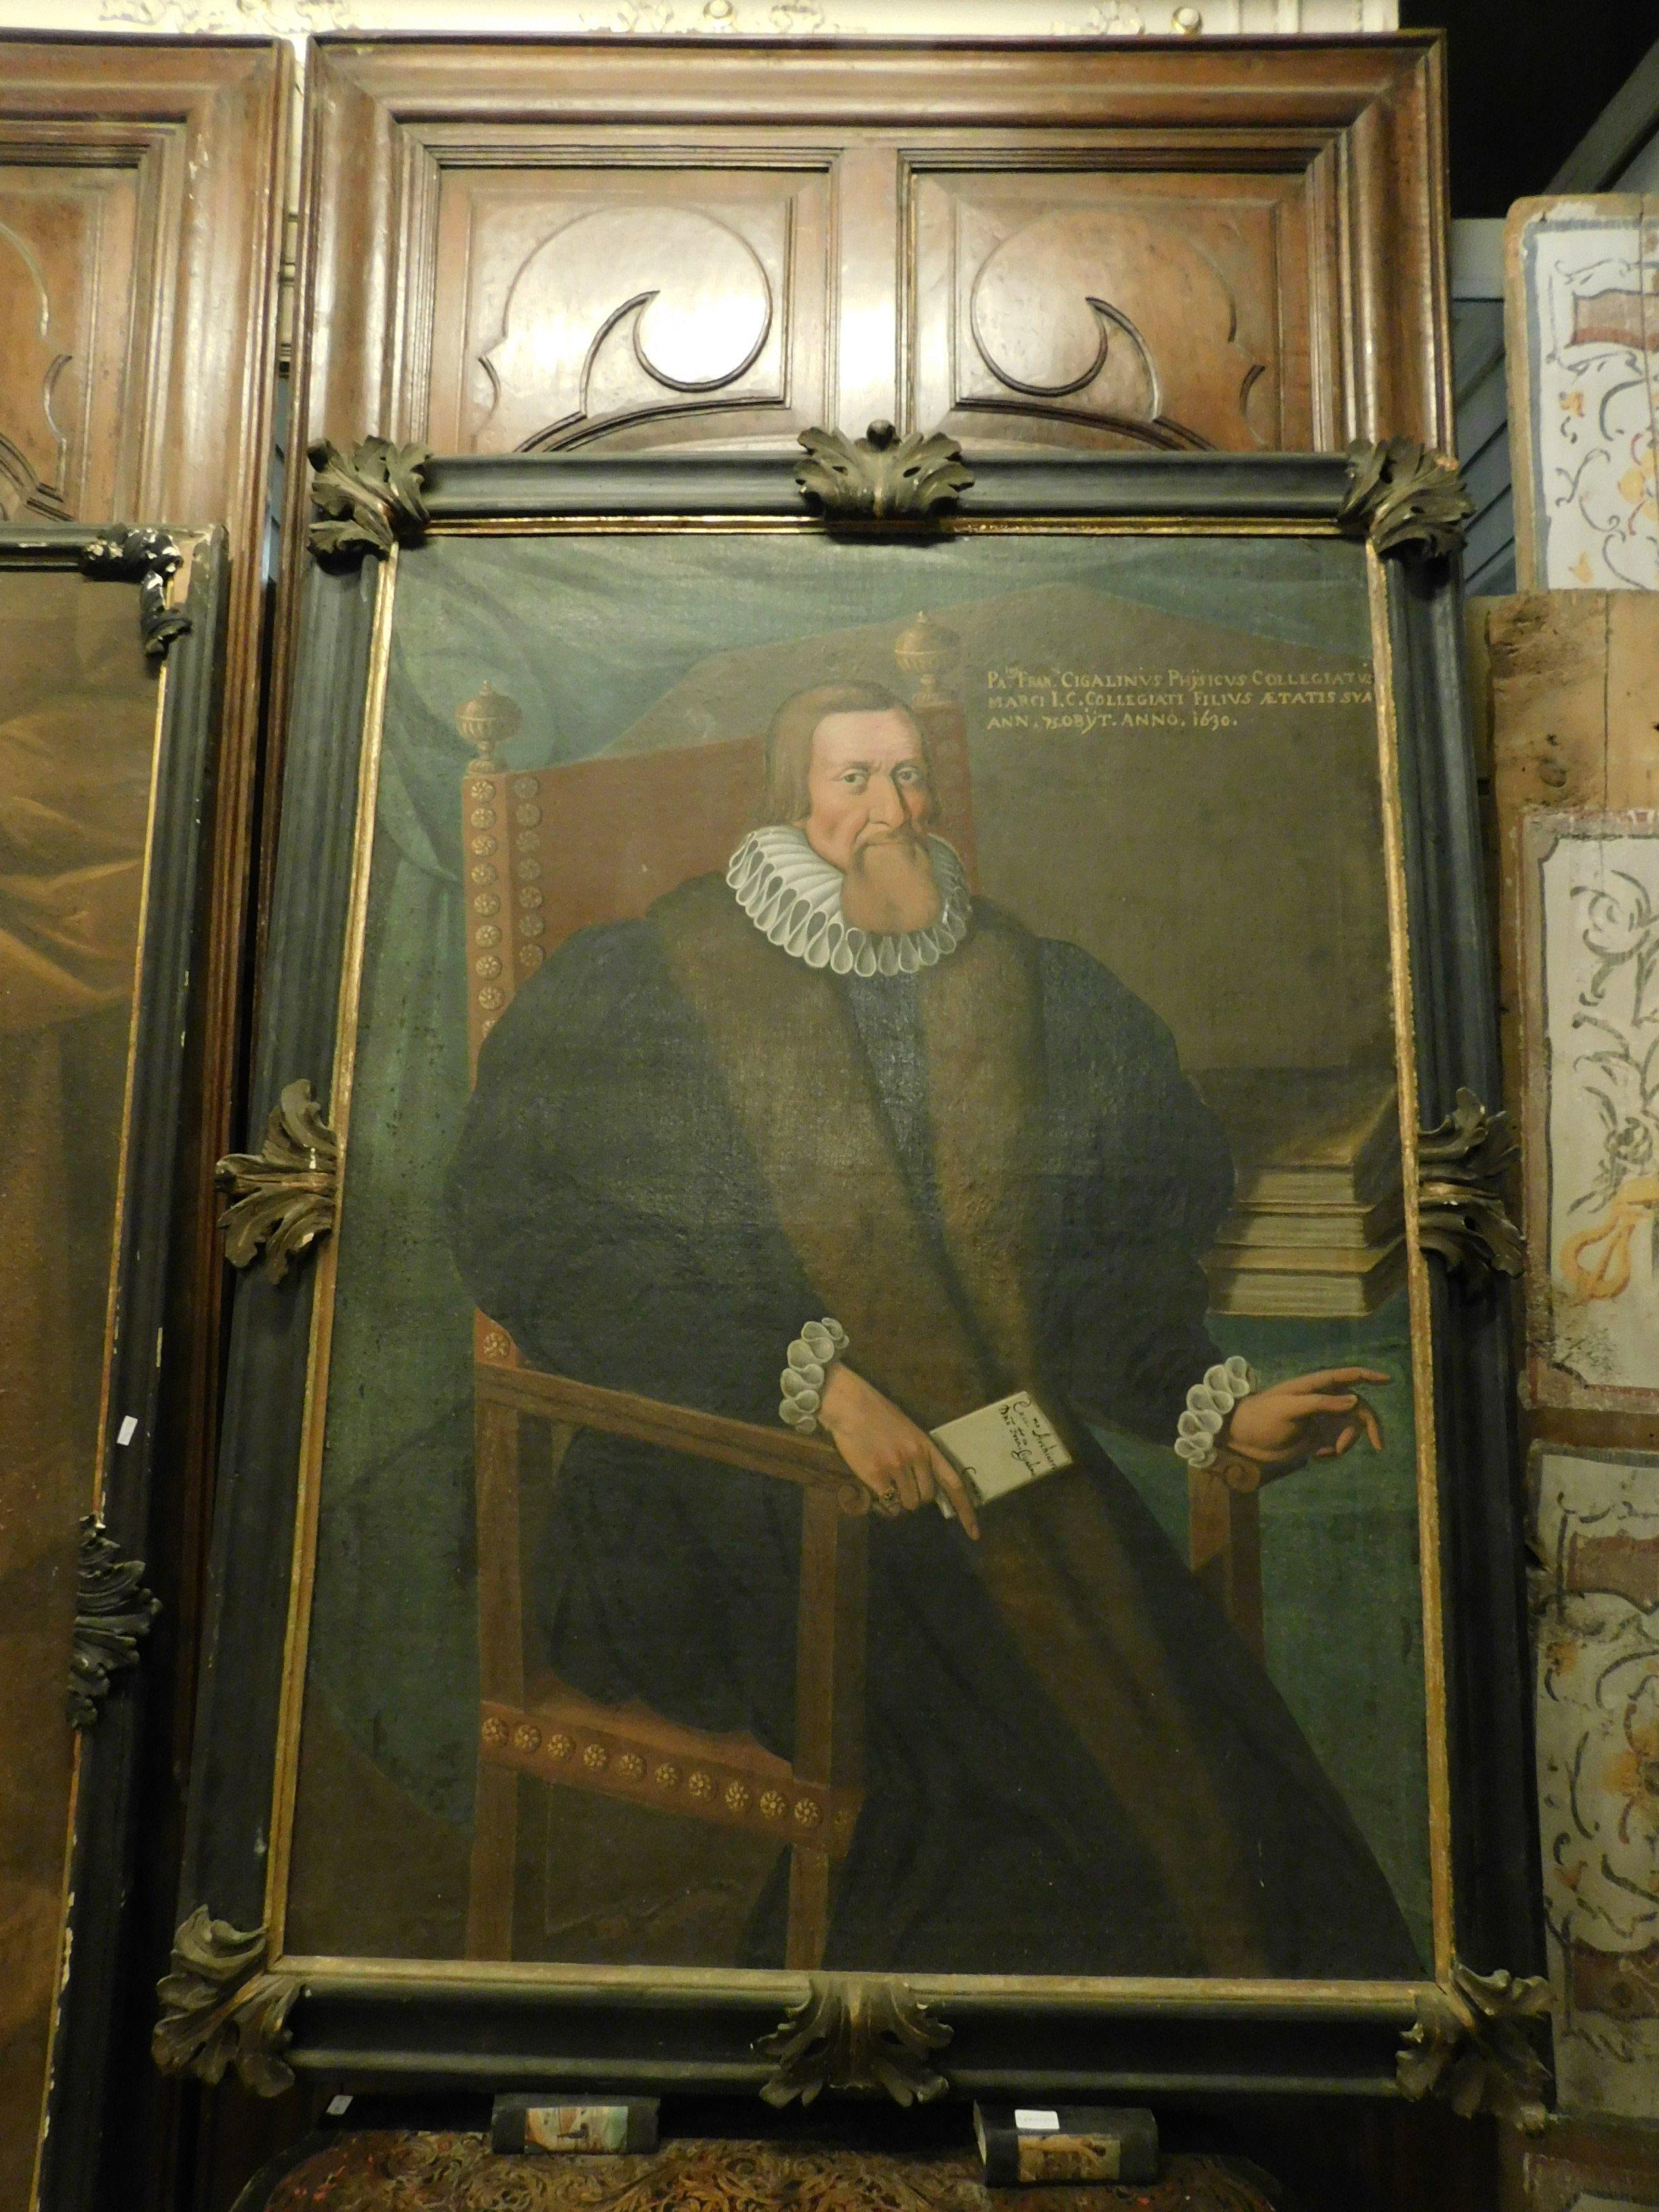 Ancient painting depicting a member of the noble family of Como: I Cigalini; hand painted in the 17th century with Coeval lacquered wood frame. At the top right there is a description of him: 